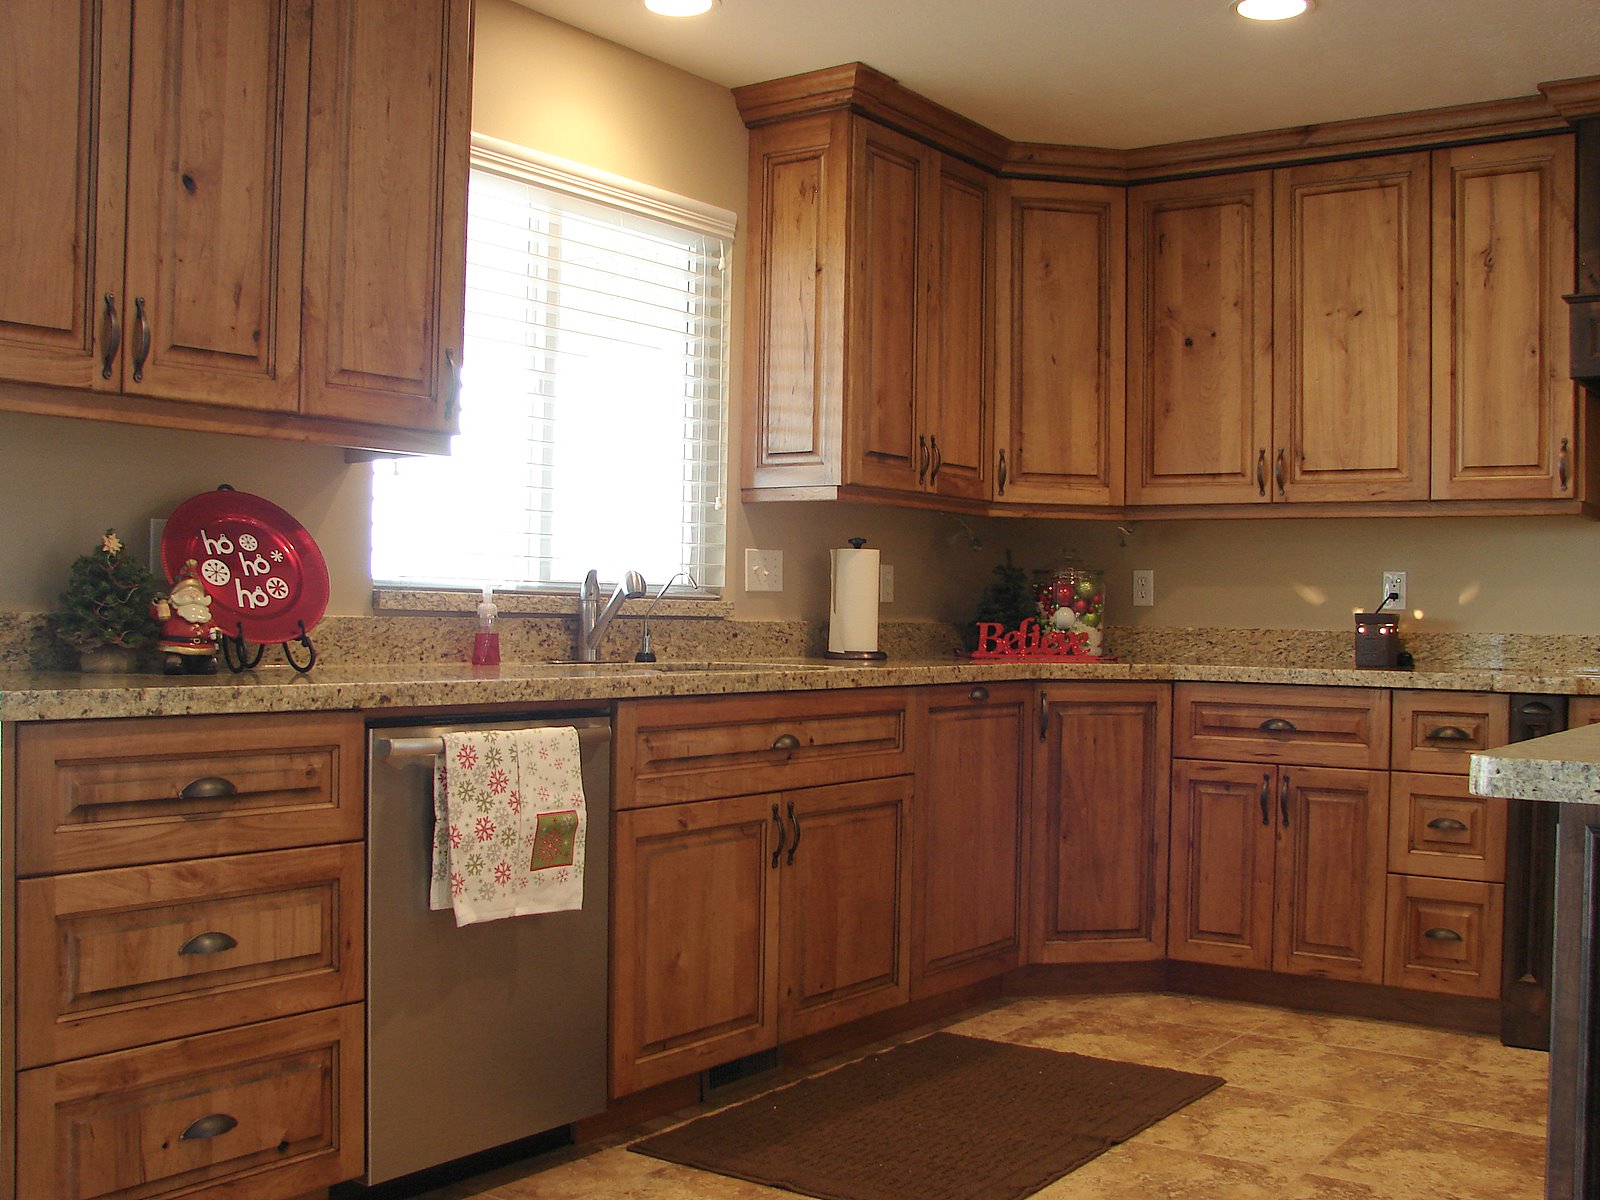 LEC Cabinets: Rustic Cherry Cabinets